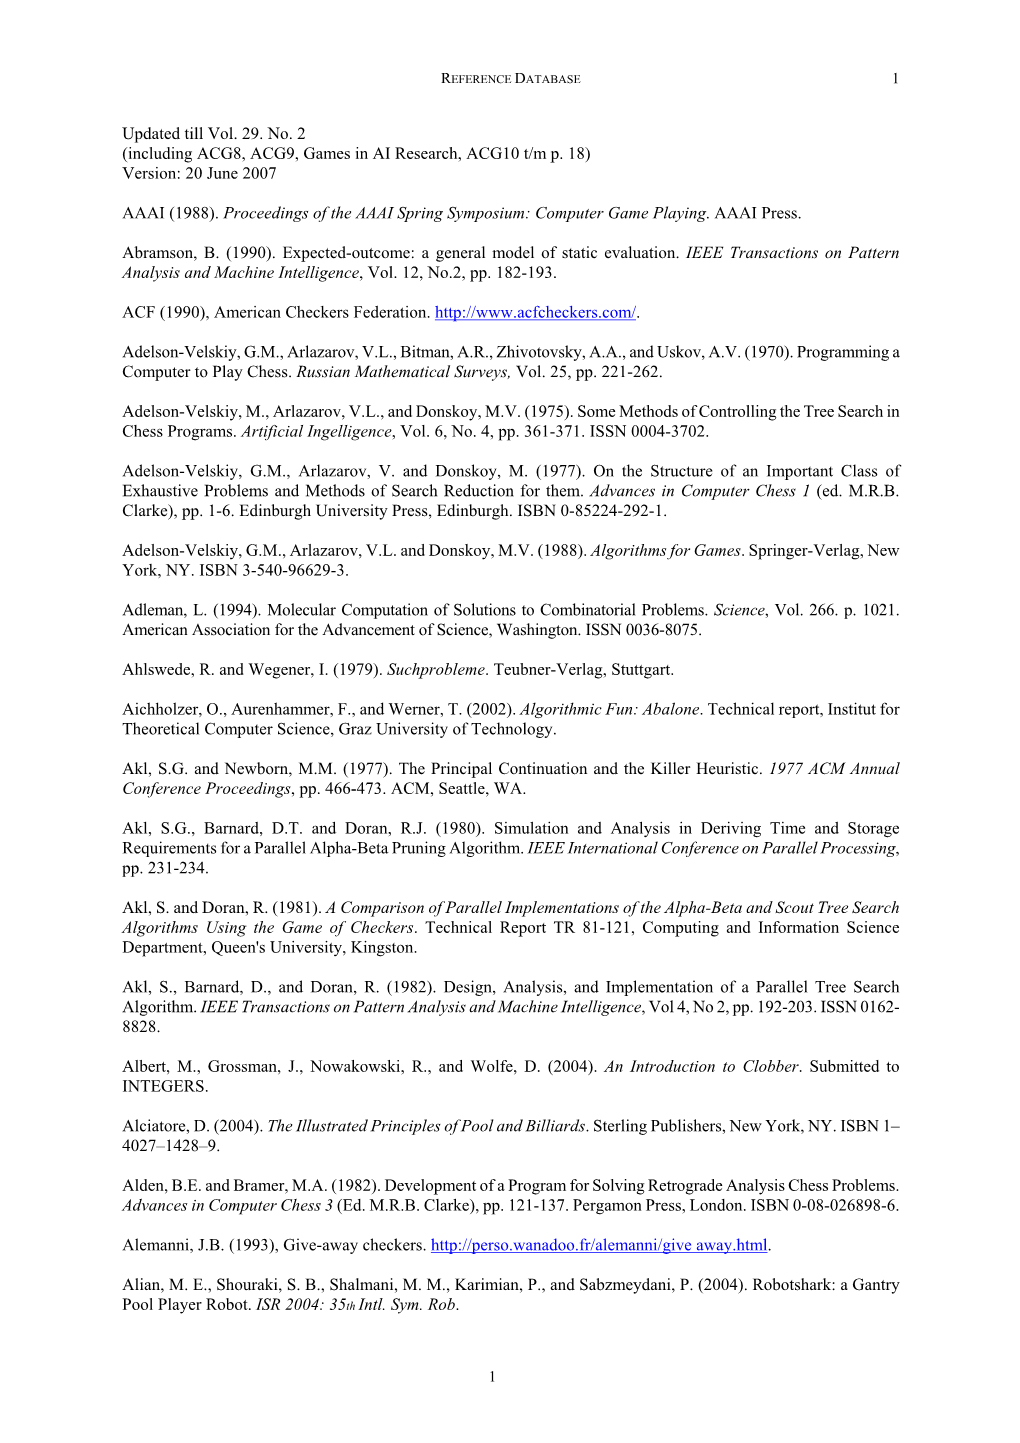 Including ACG8, ACG9, Games in AI Research, ACG10 T/M P. 18) Version: 20 June 2007